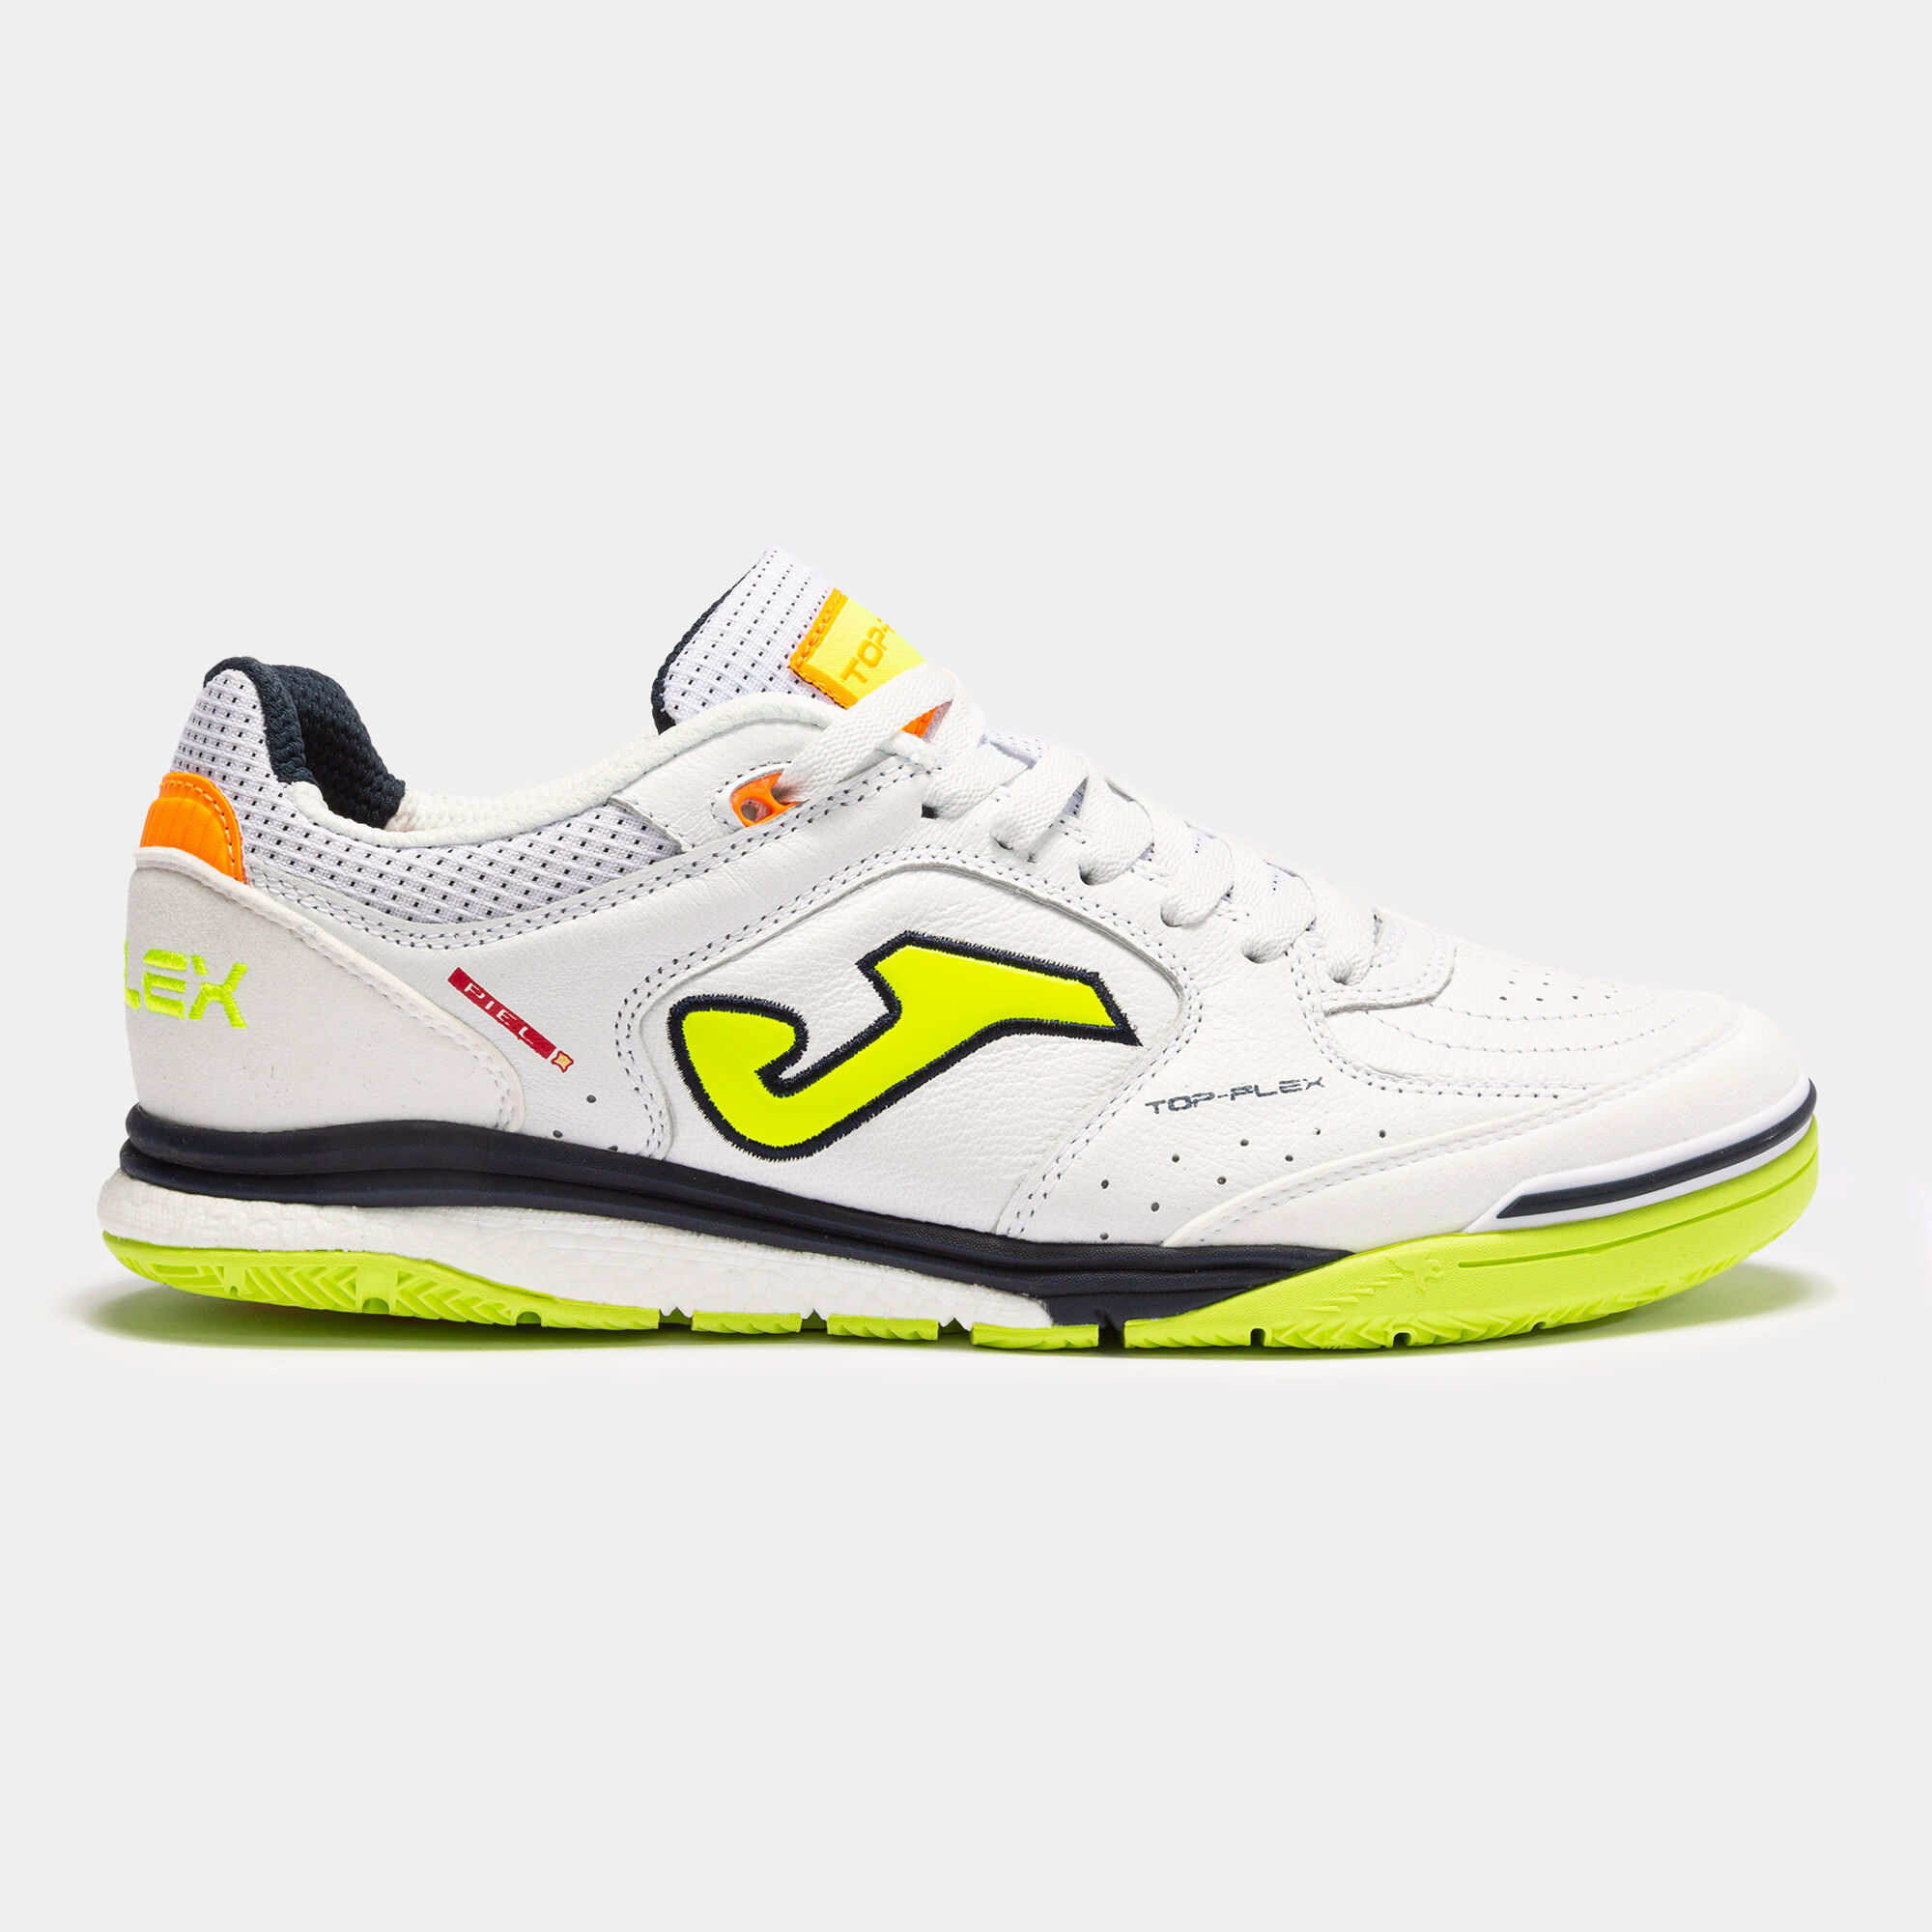 Futsal shoes Top Flex Rebound 23 indoor white lime | JOMA®